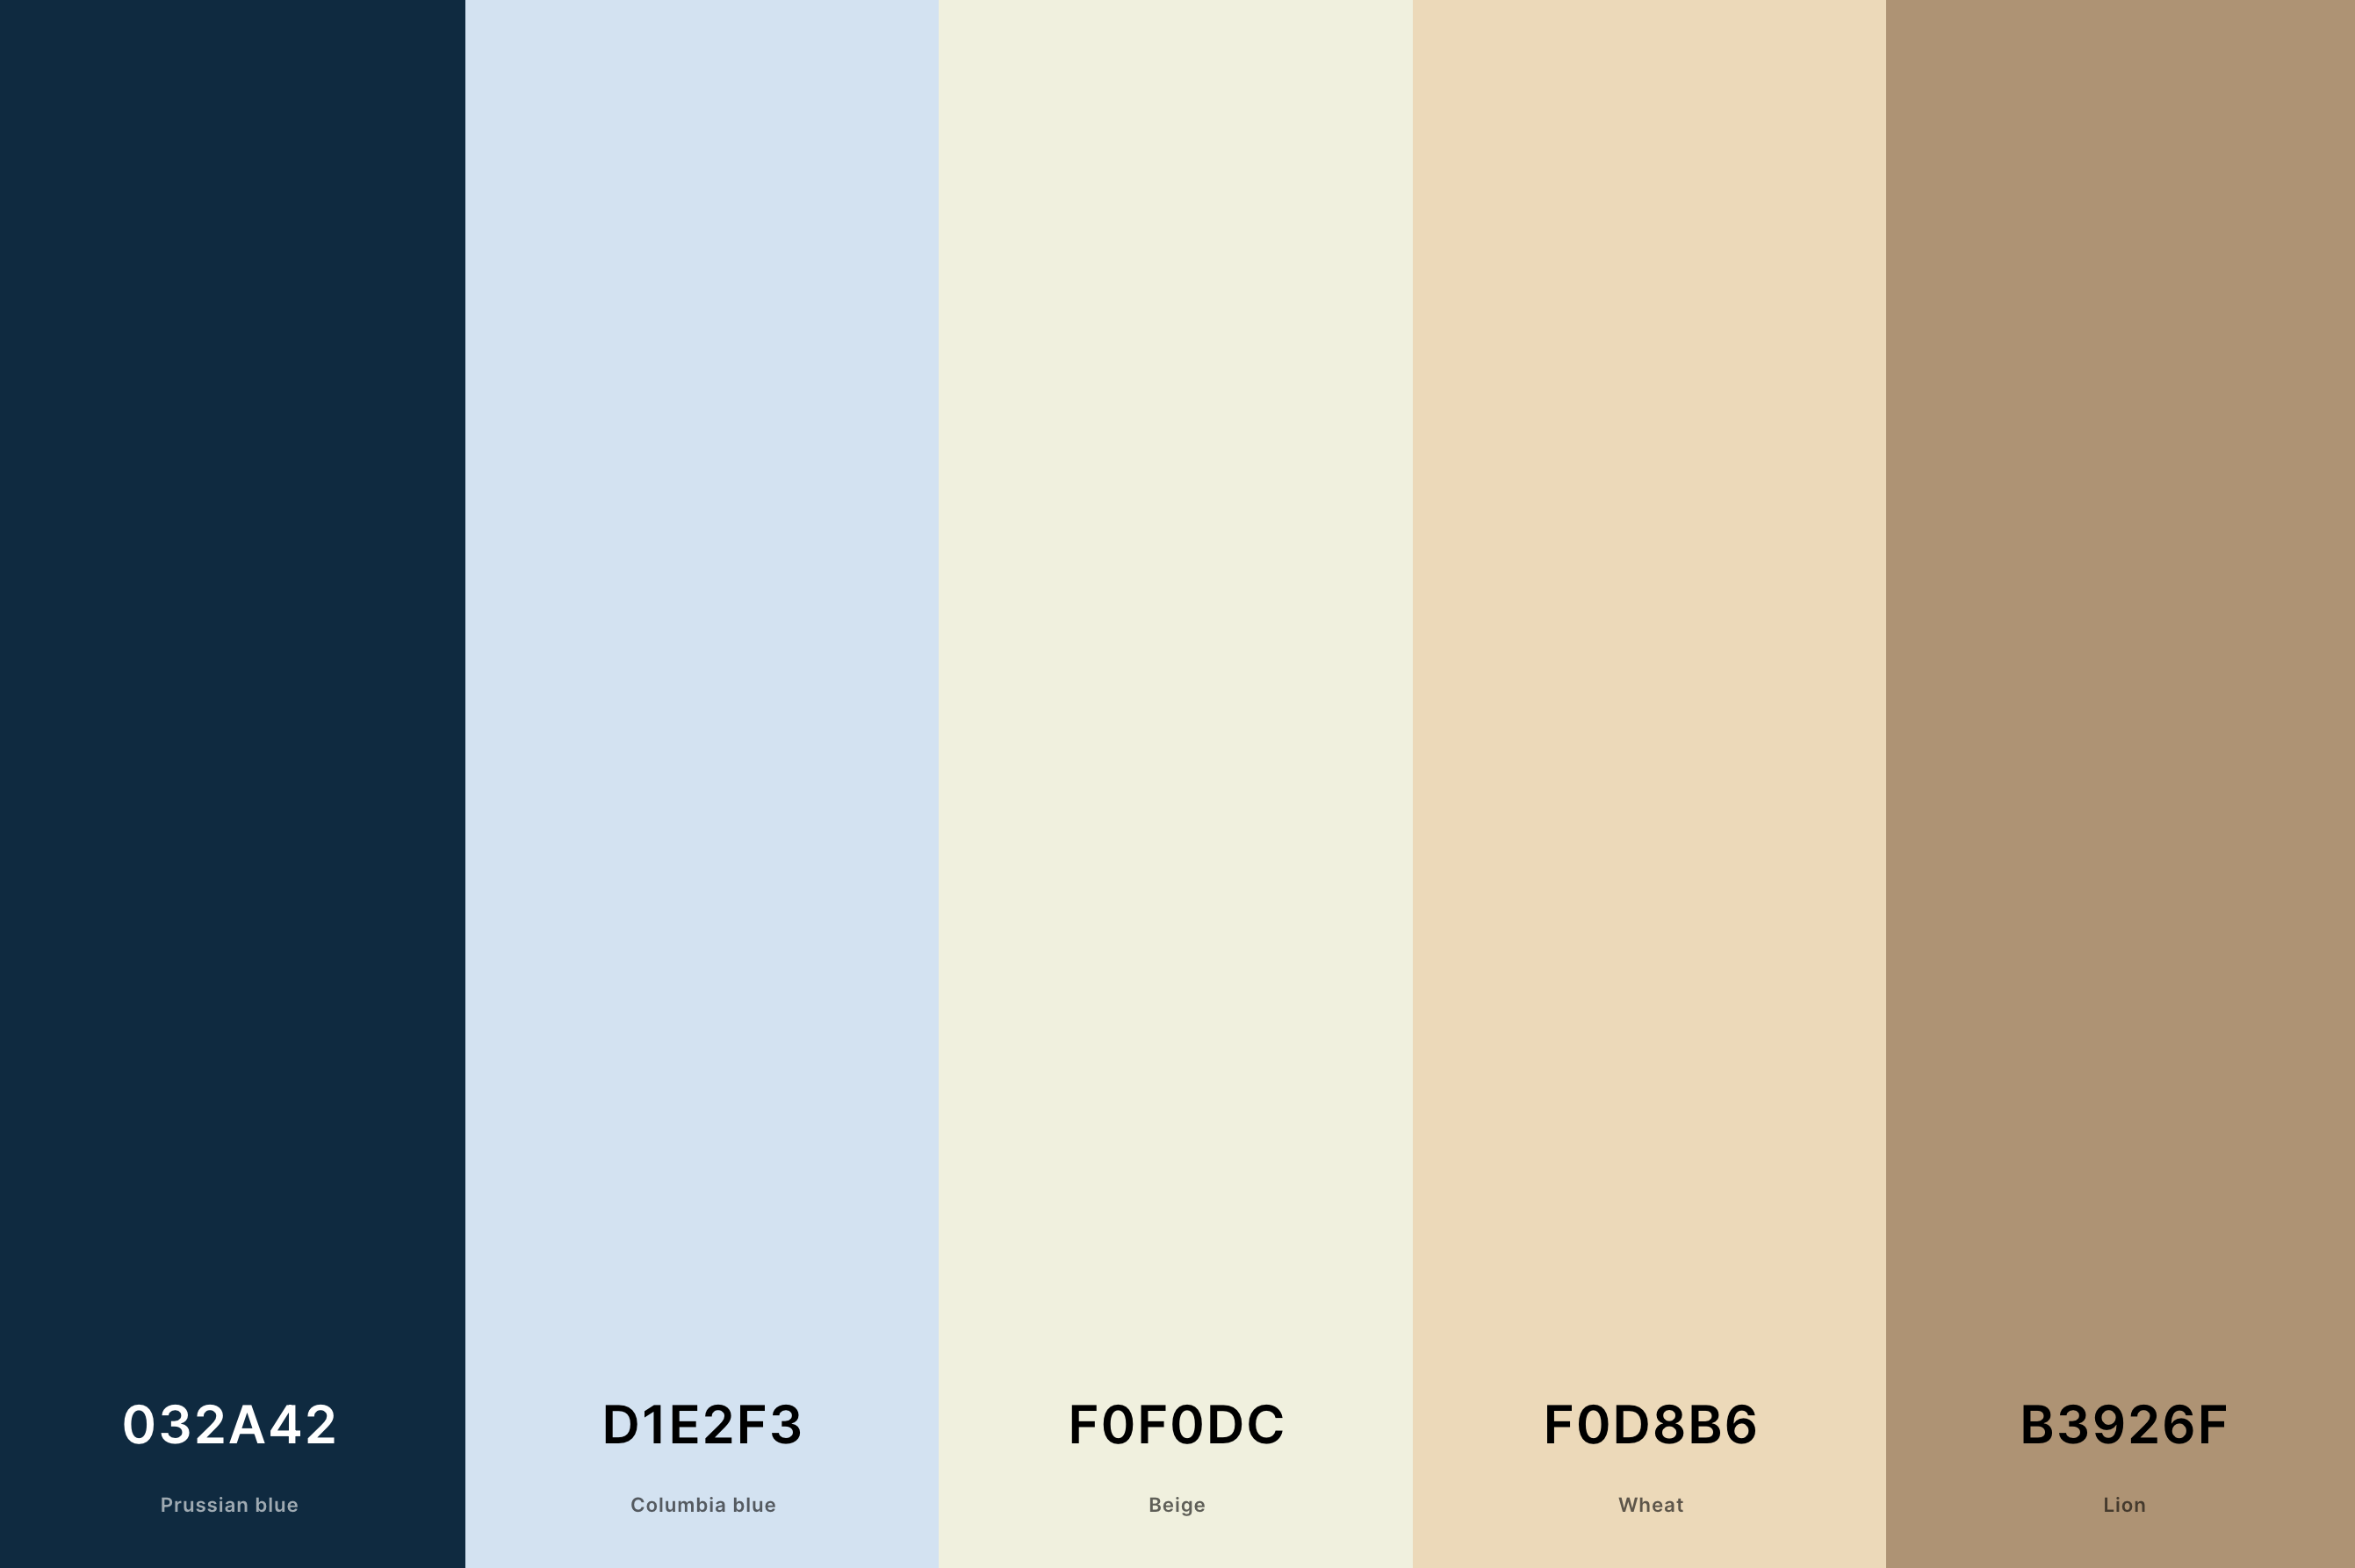 5. Blue And Beige Color Palette Color Palette with Prussian Blue (Hex #032A42) + Columbia Blue (Hex #D1E2F3) + Beige (Hex #F0F0DC) + Wheat (Hex #F0D8B6) + Lion (Hex #B3926F) Color Palette with Hex Codes